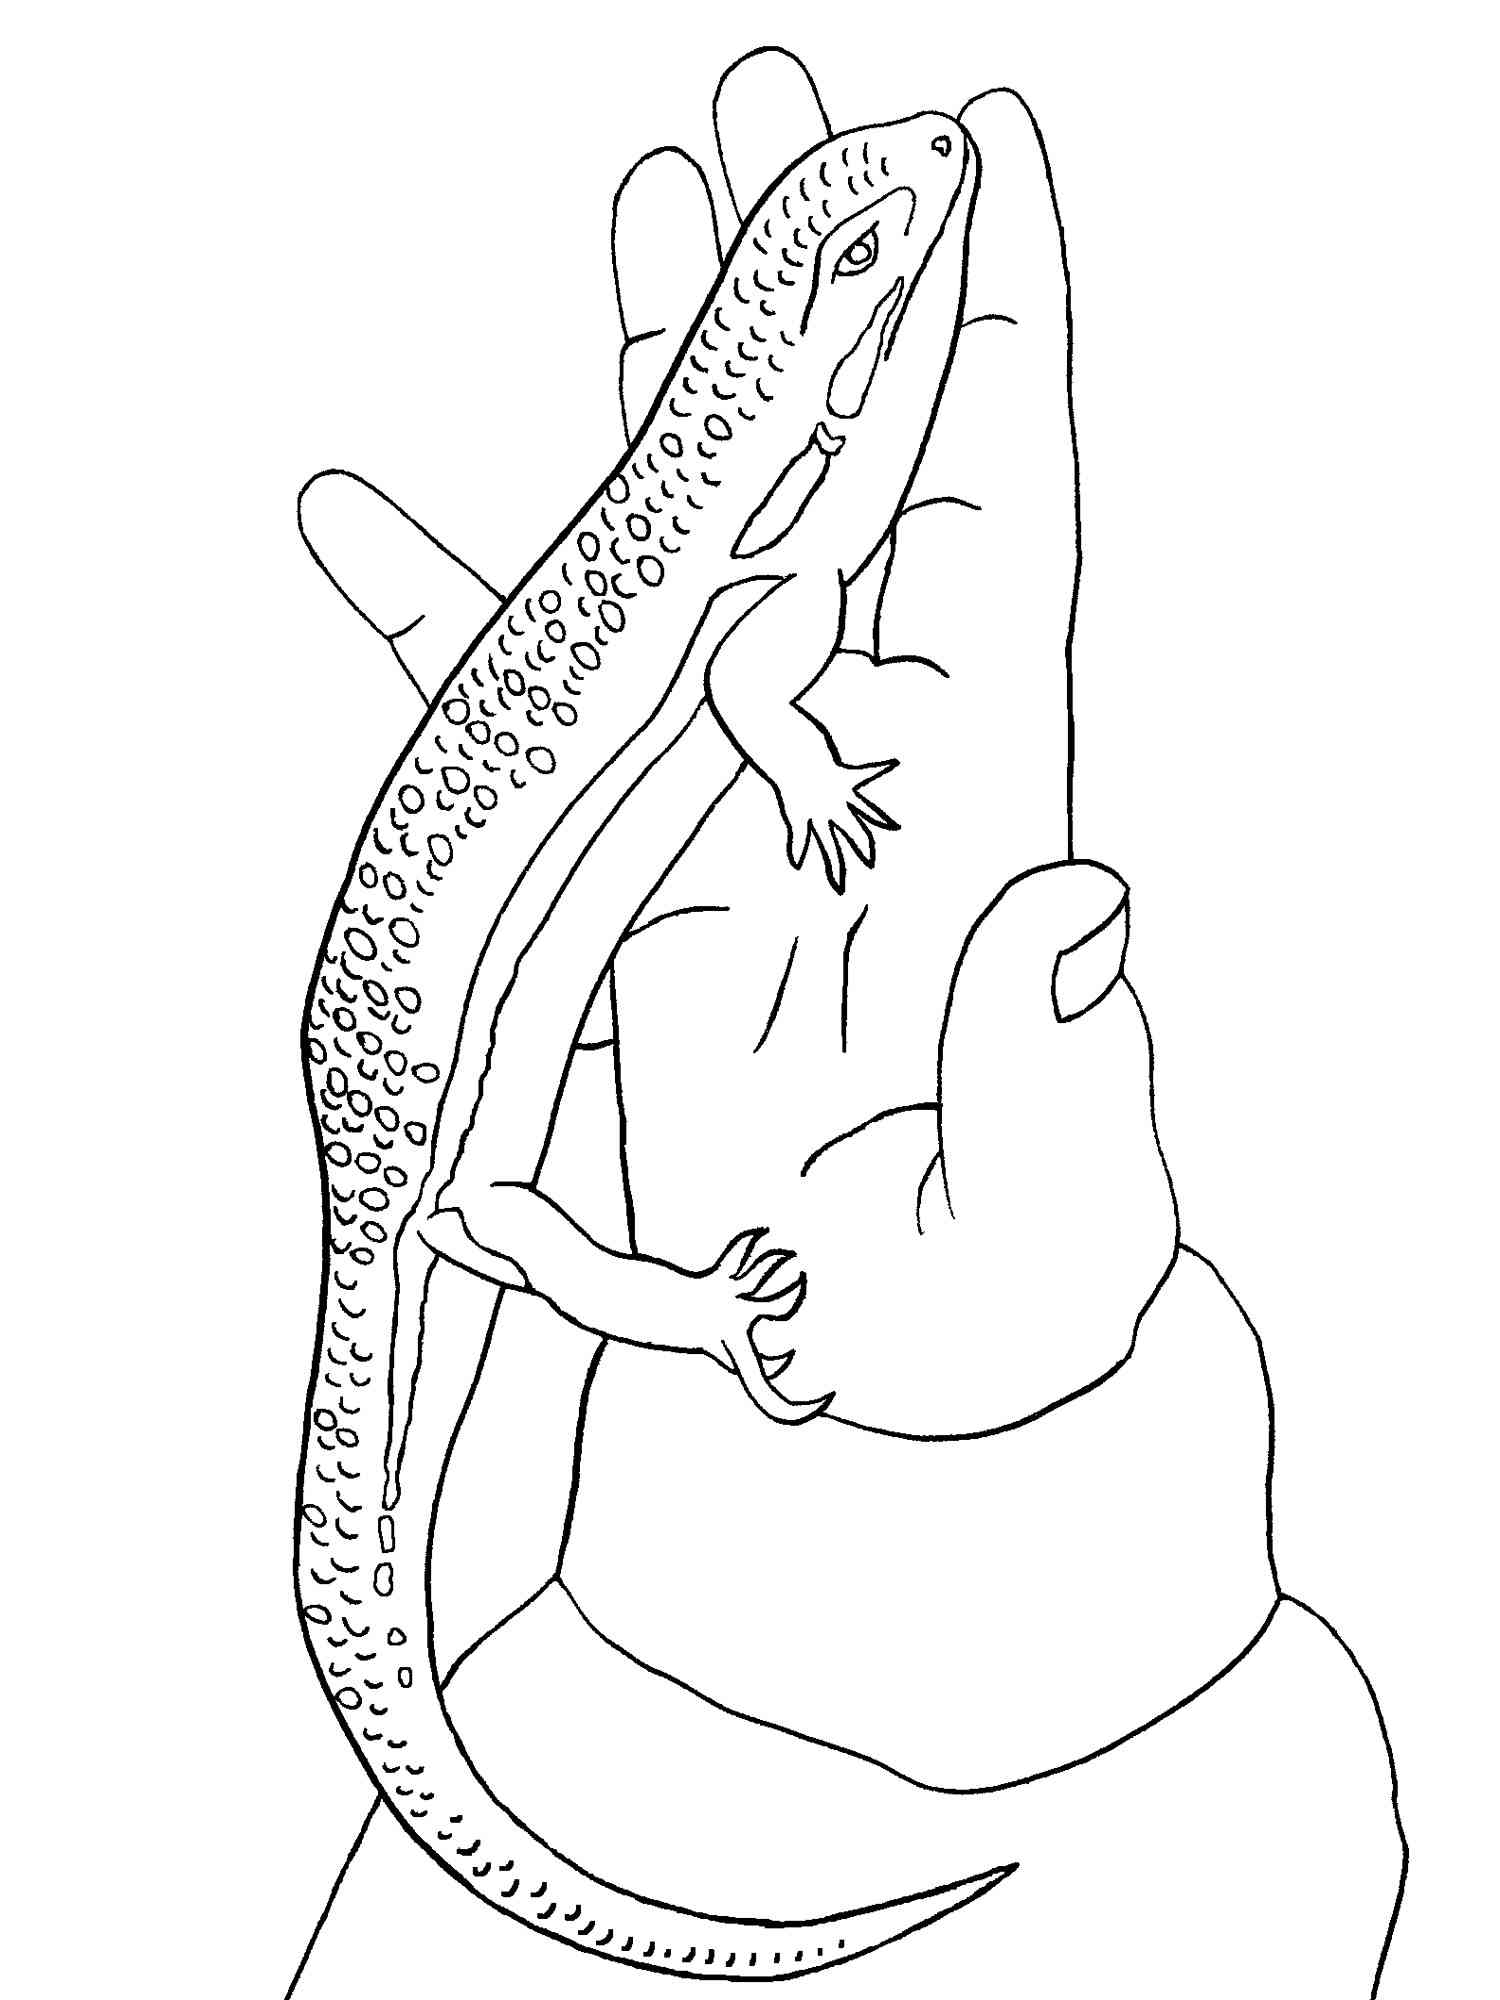 Skink in the palm of your hand coloring page